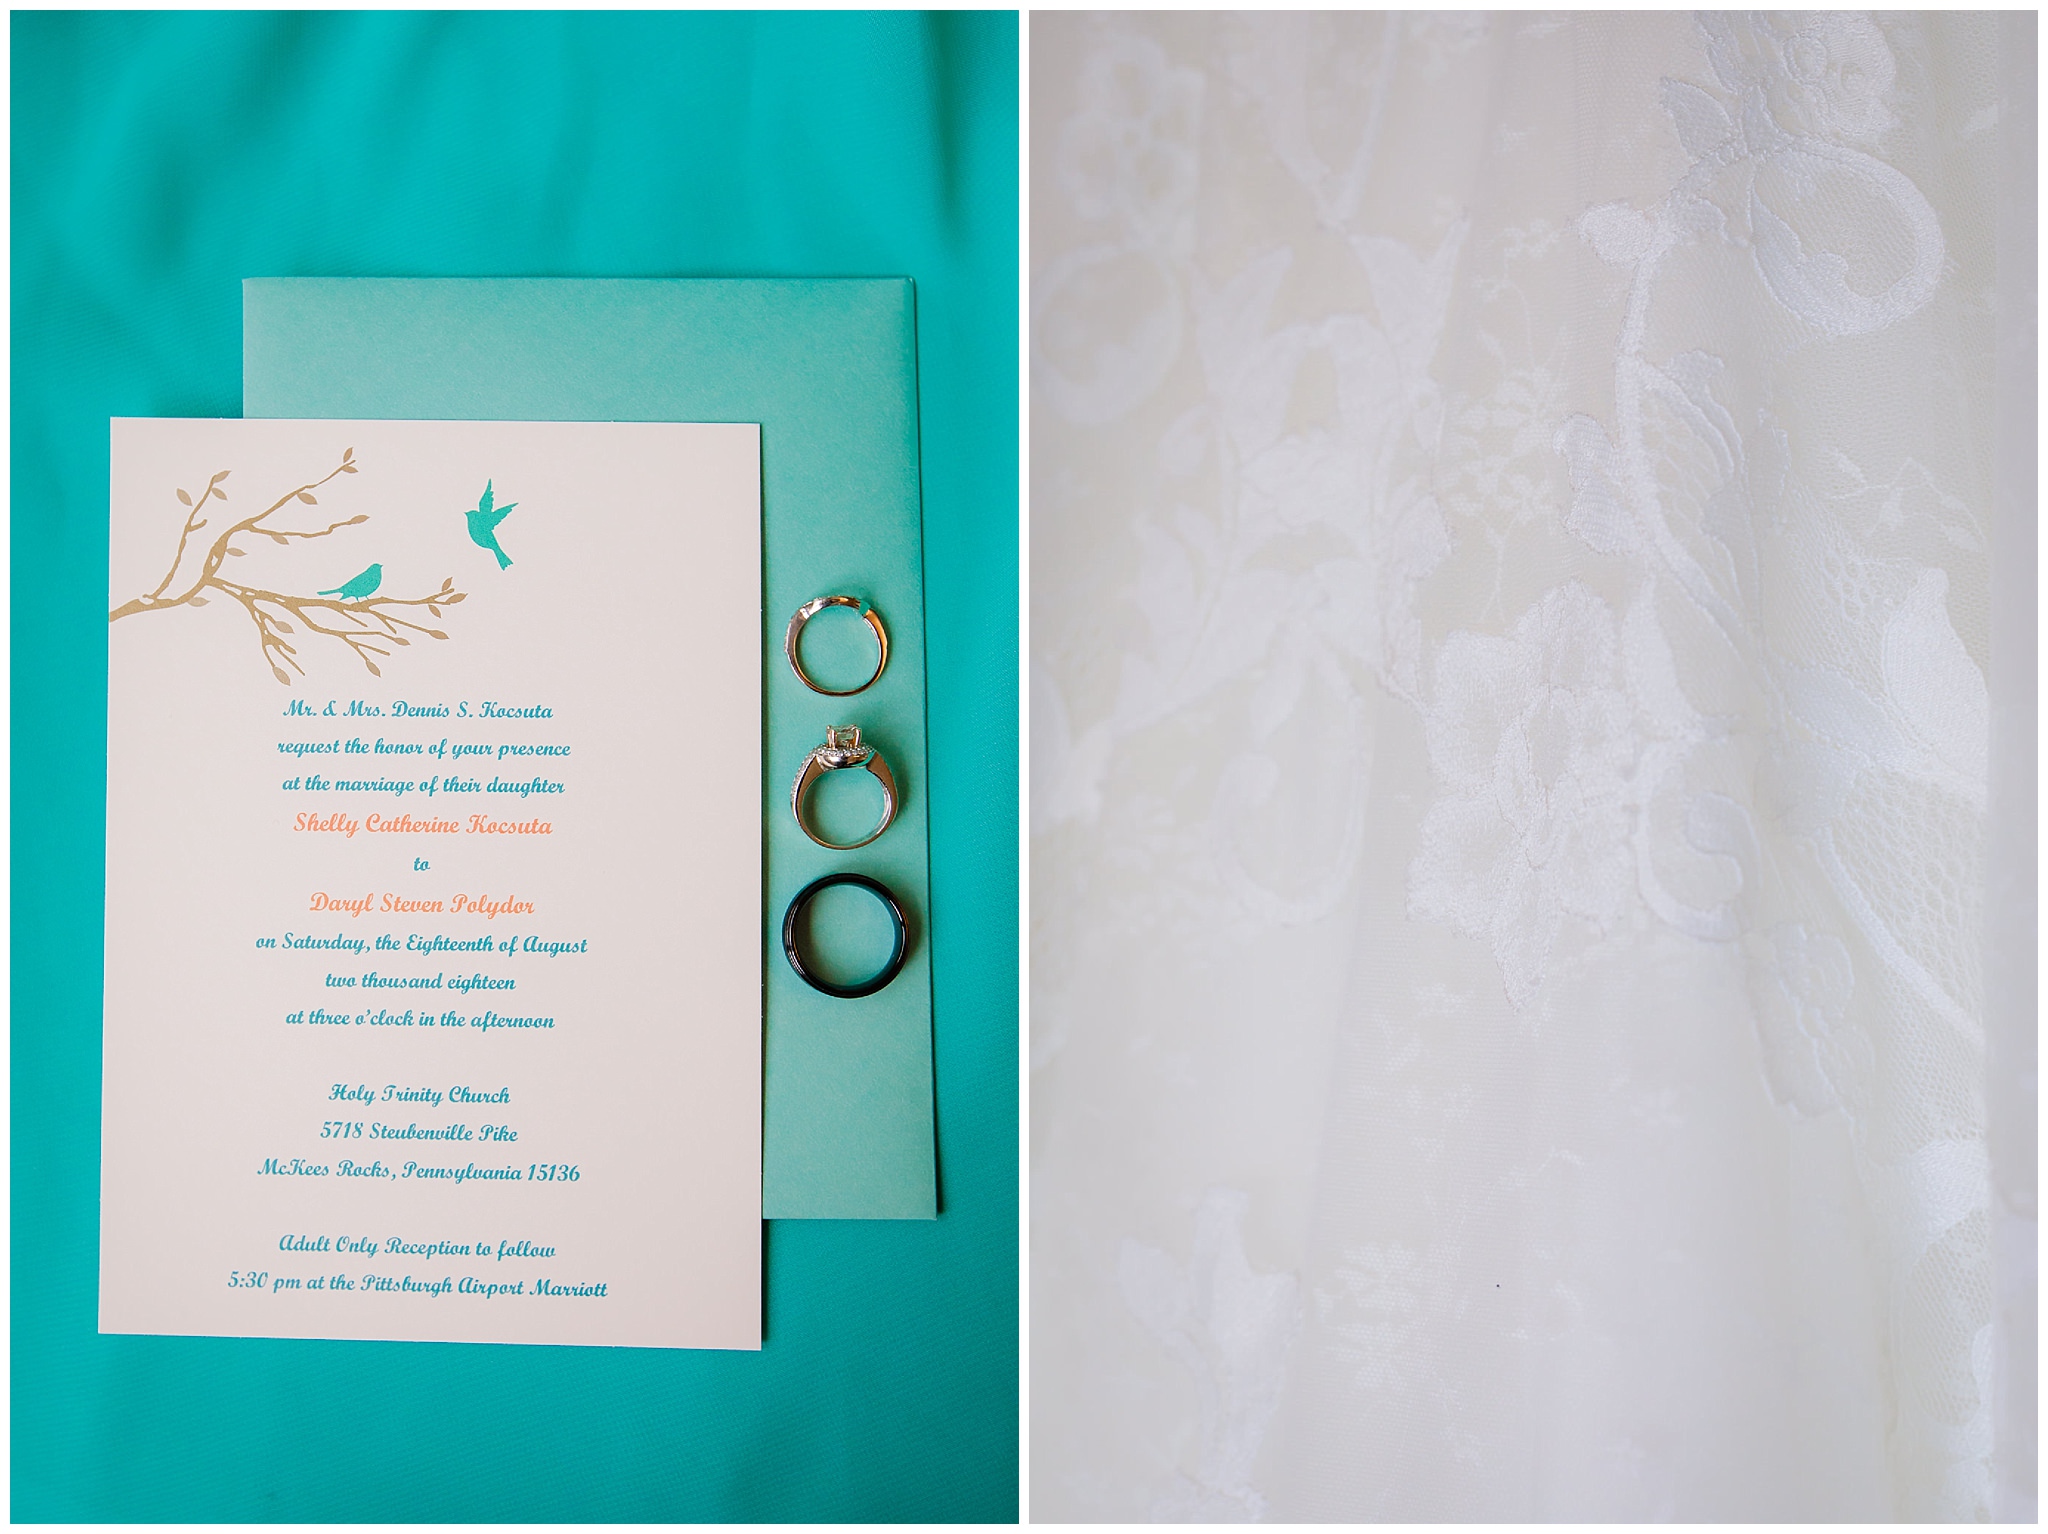 Bride's invitation suite and wedding bands sit on a turquoise bridesmaids dress